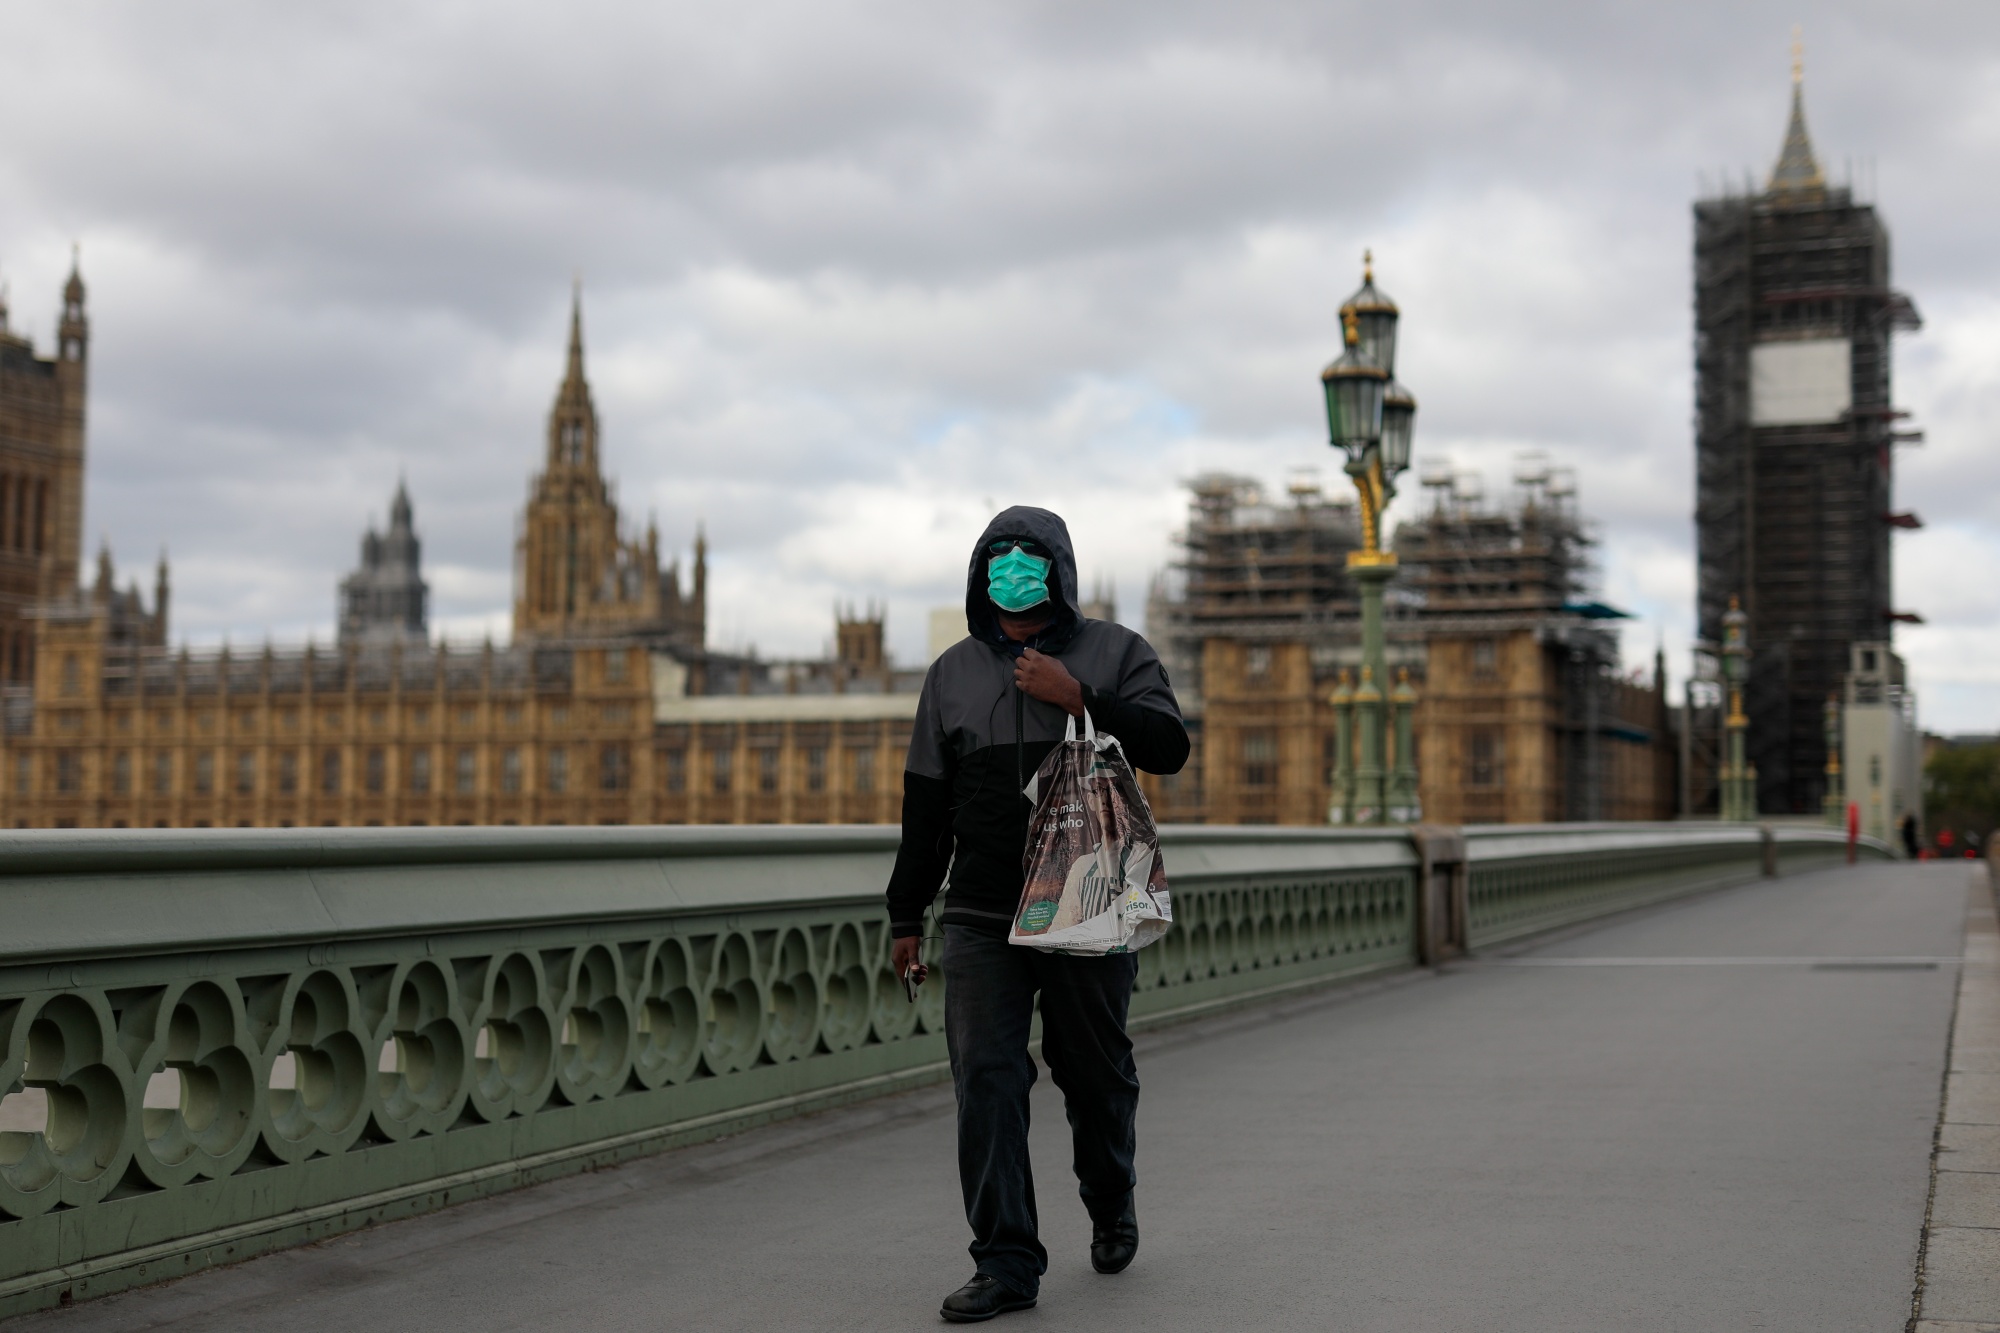 A commuter wearing a protective face mask crosses Westminster Bridge in view of the Houses of Parliament and Elizabeth Tower in London, U.K., on&nbsp;May 11.